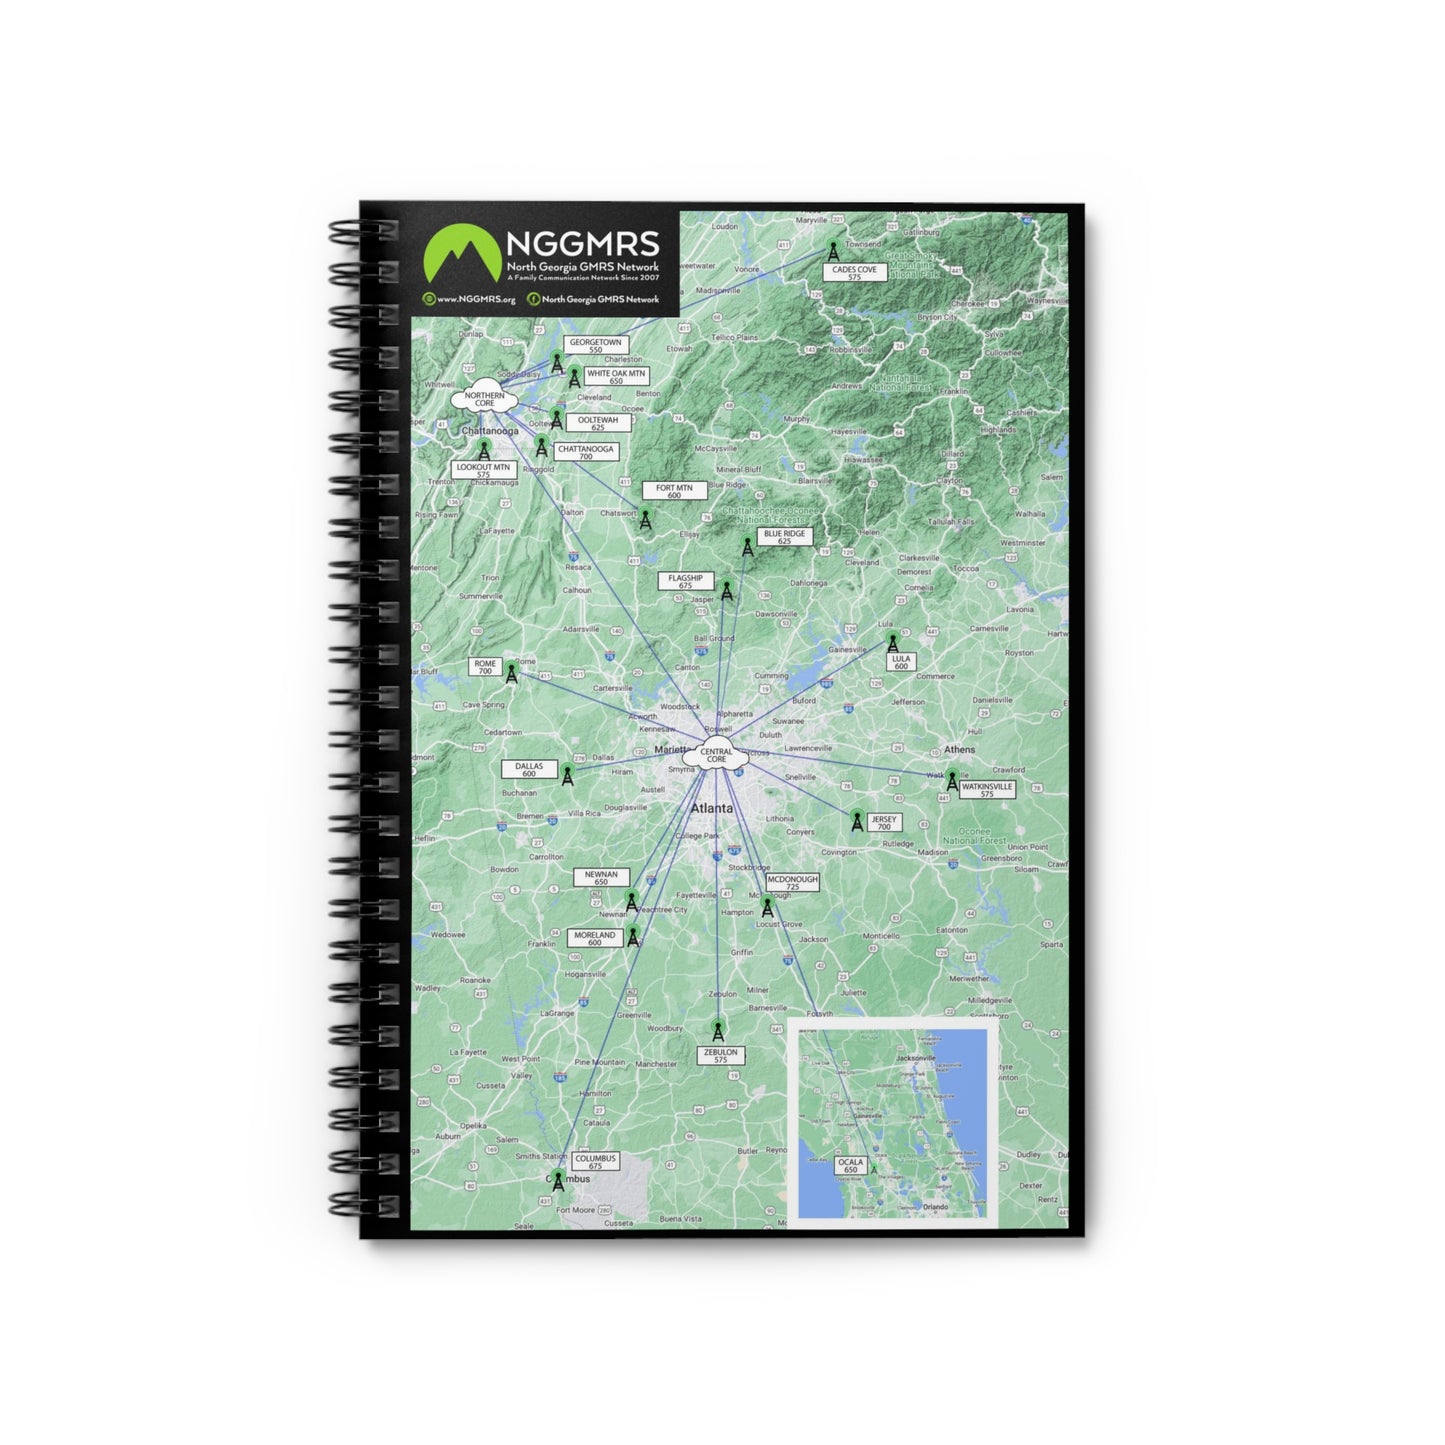 Repeater Map Spiral Notebook - 8" x 6" Ruled Line